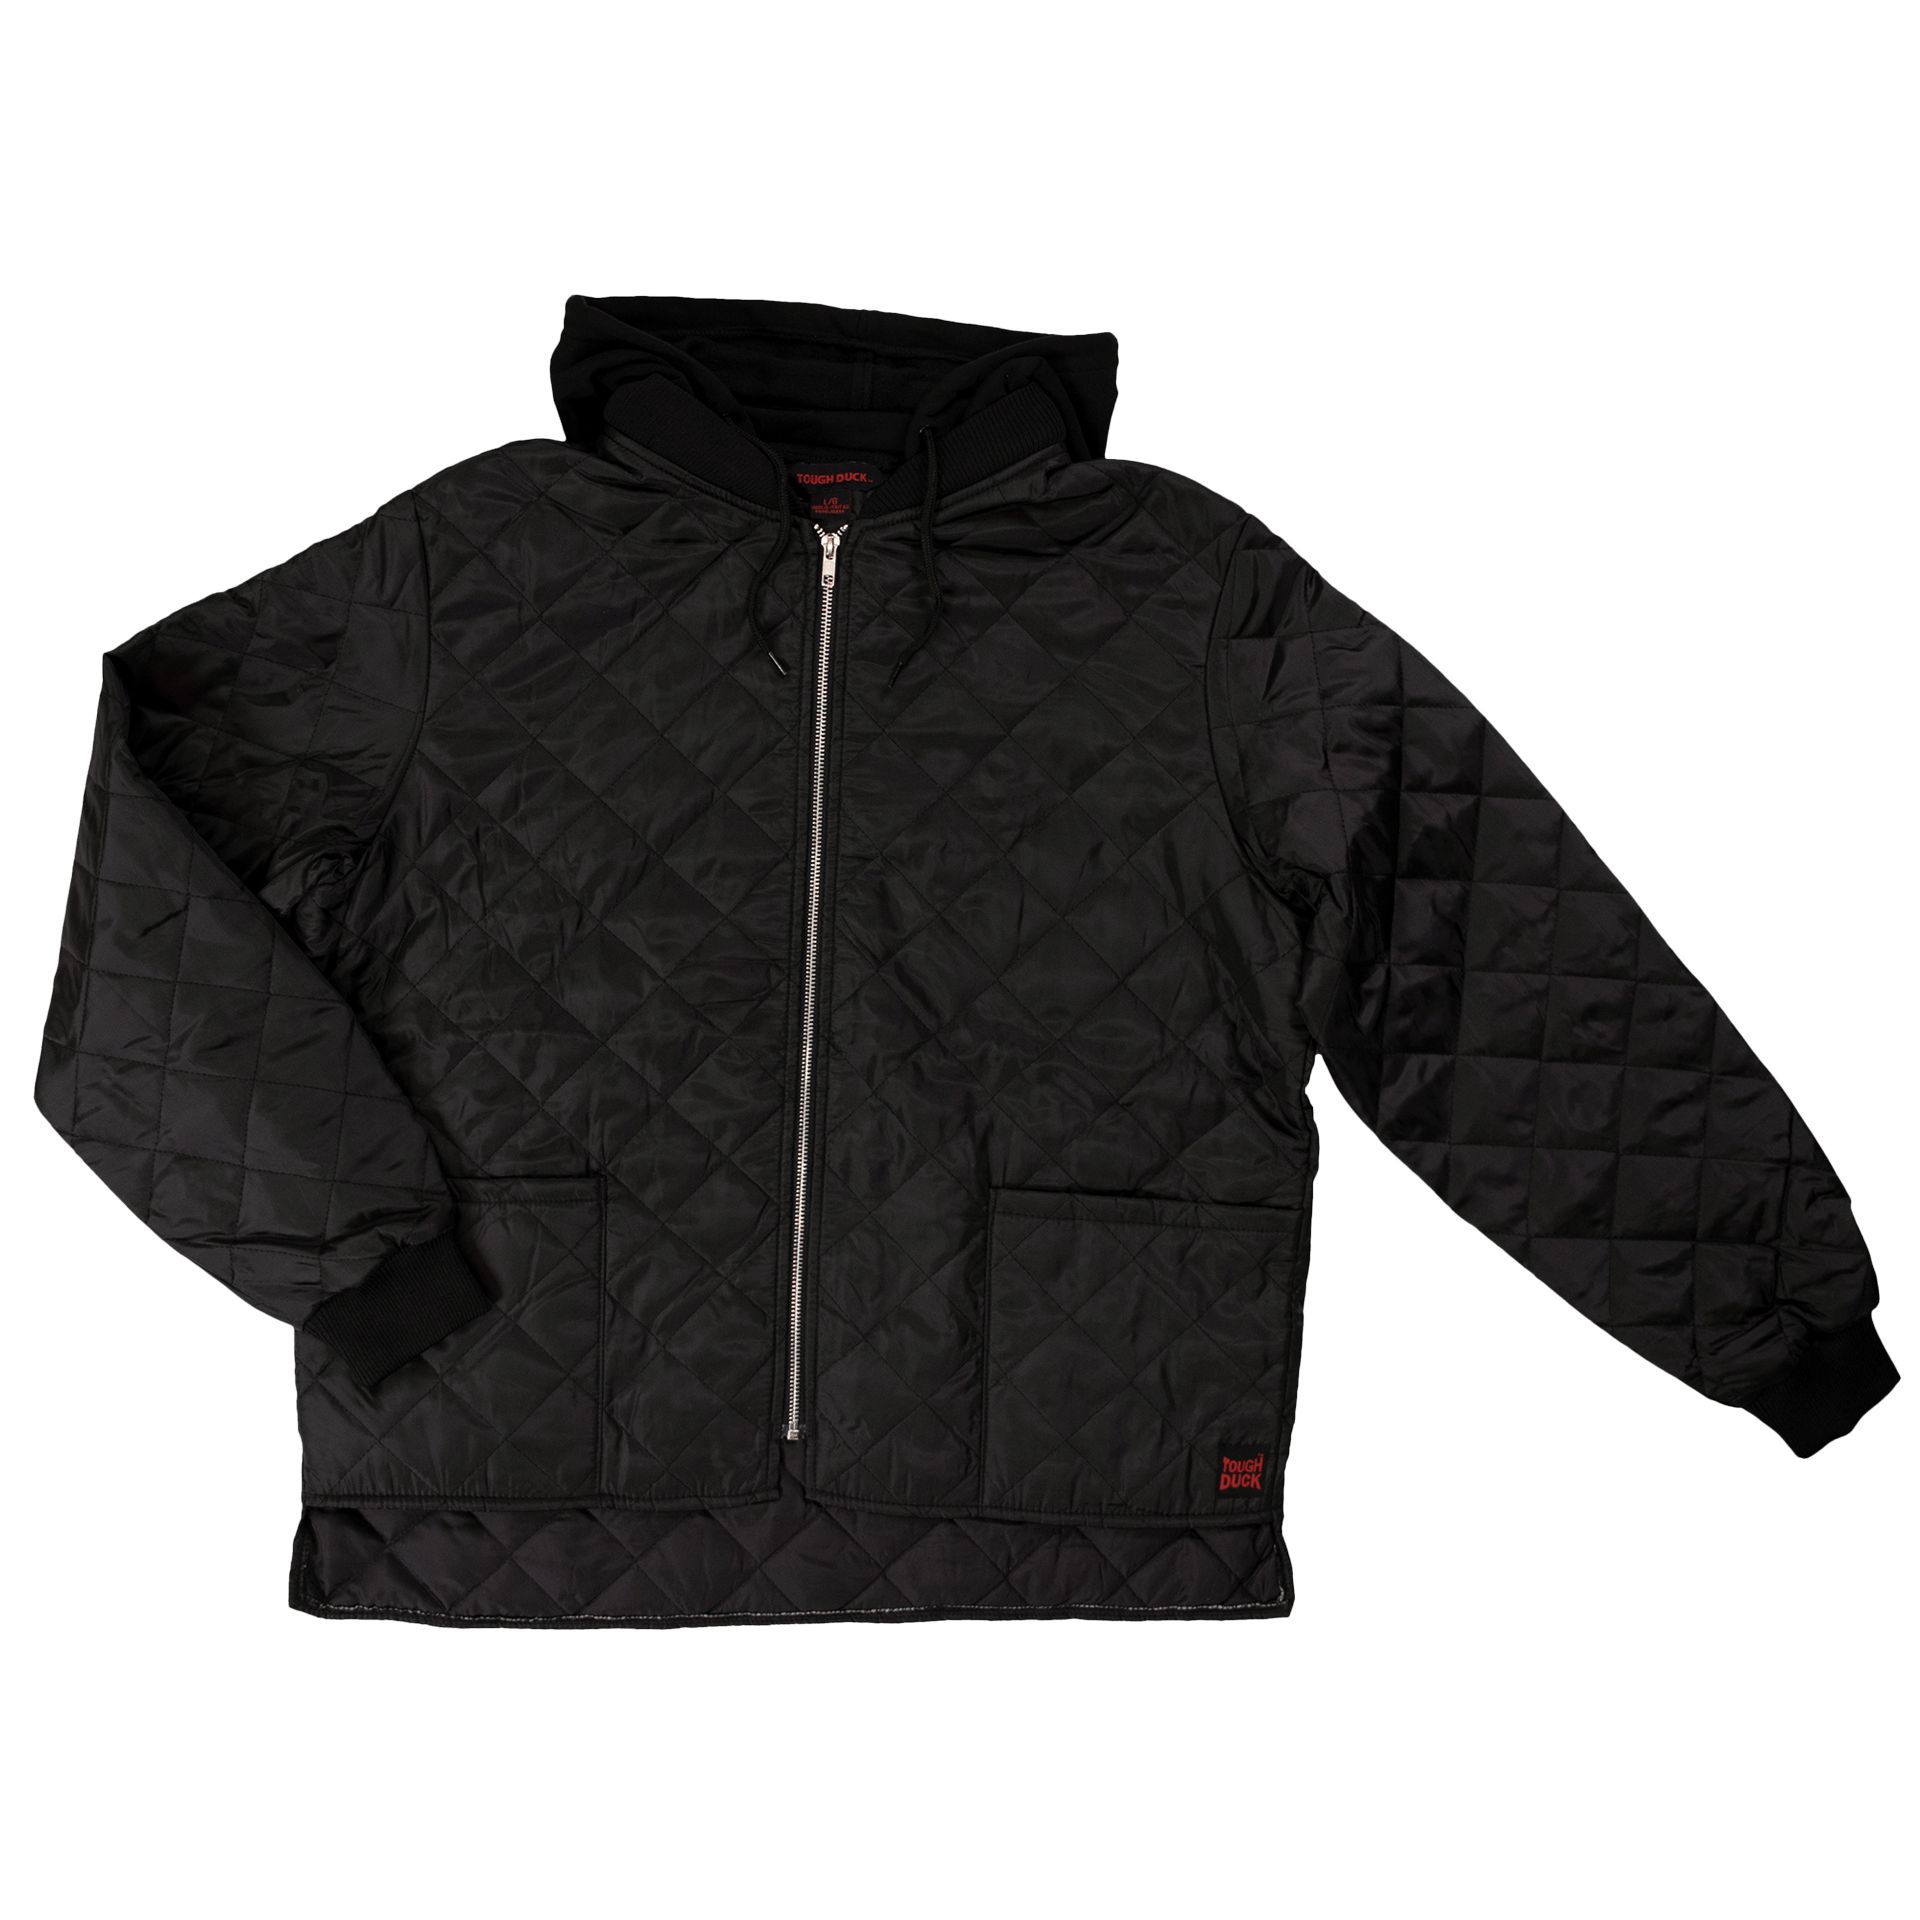 Tough Duck®Hooded Quilted Freezer Jacket i9J5